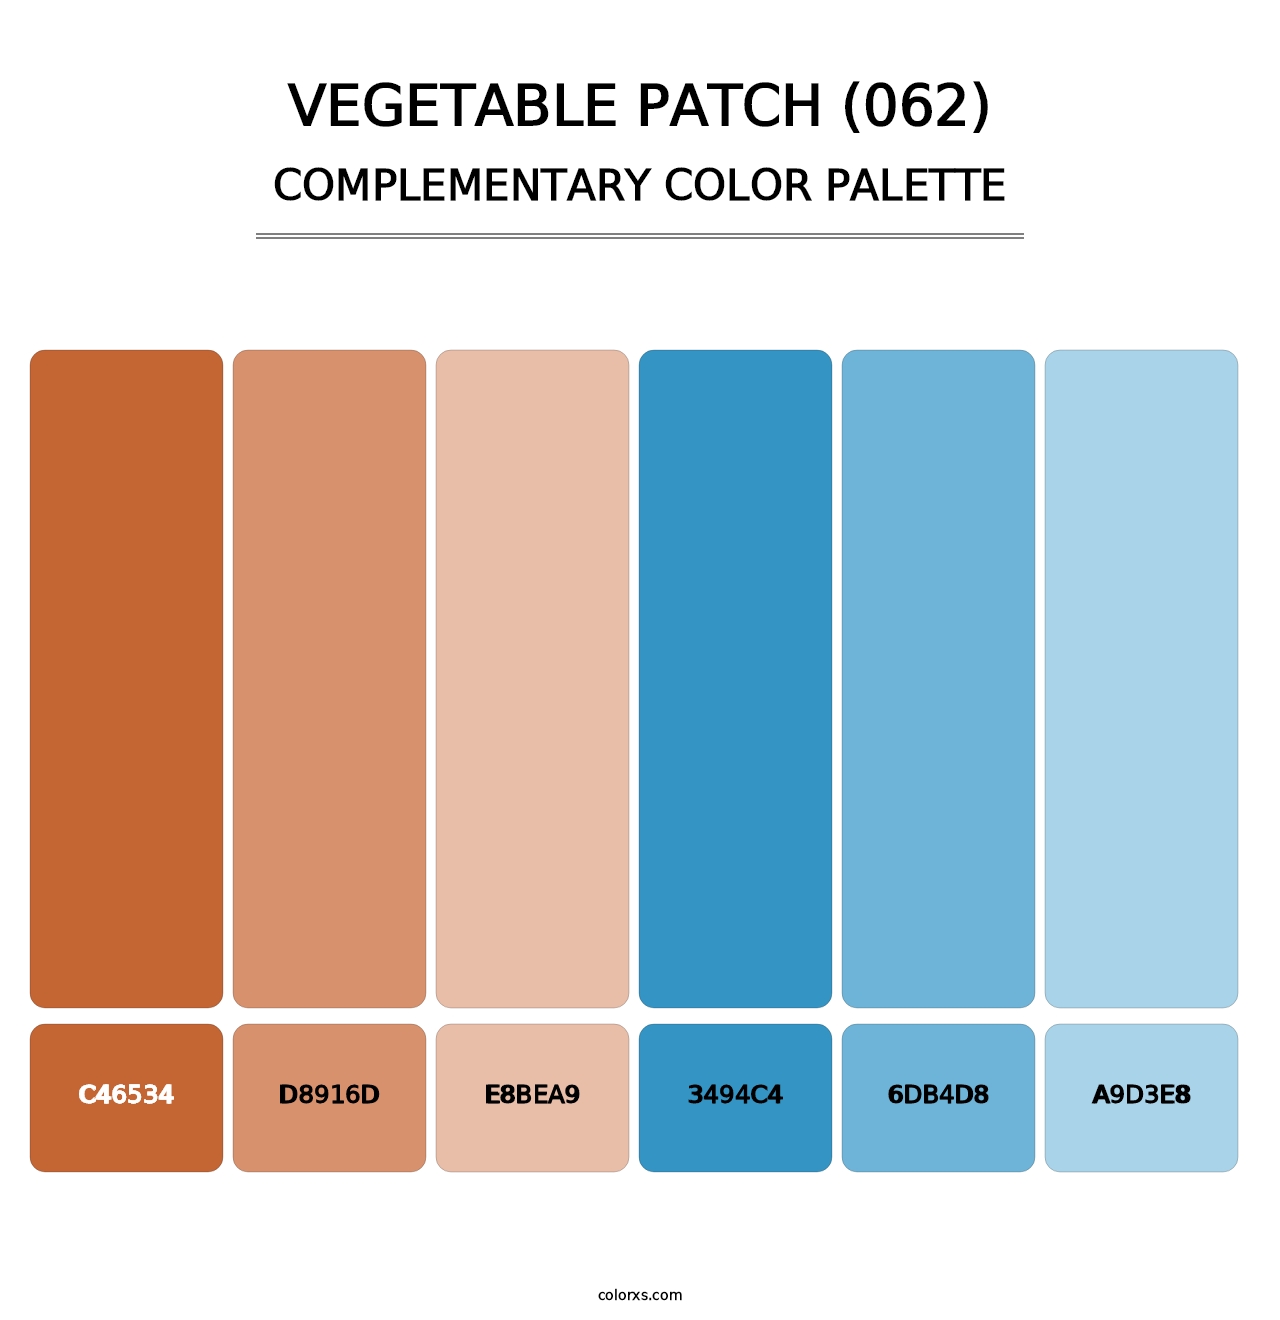 Vegetable Patch (062) - Complementary Color Palette